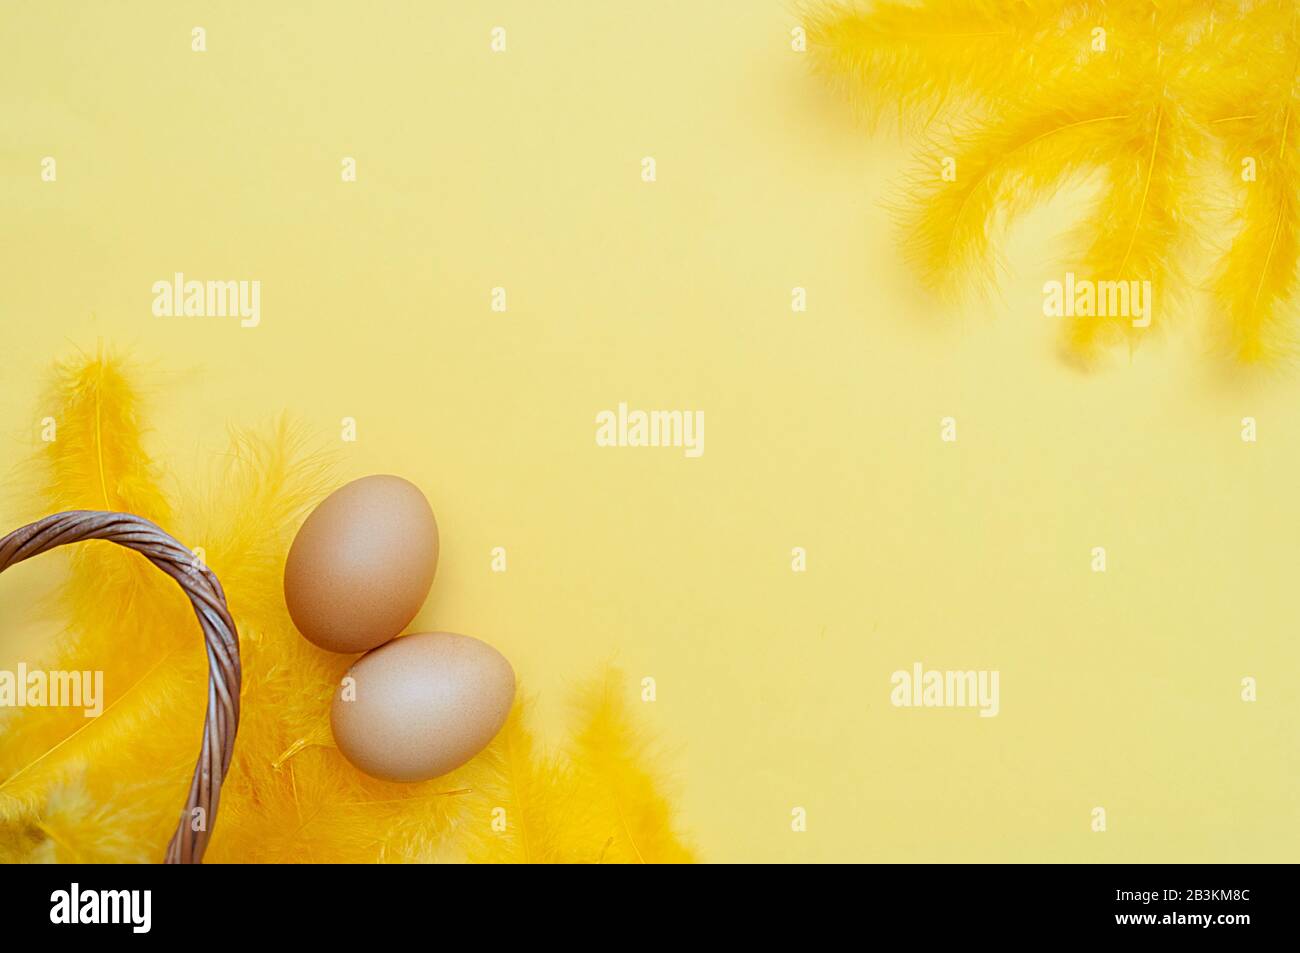 simple chicken Easter eggs with yellow fluffy feathers in a small wicker basket with a high handle on a yellow background. Happy Easter wallpaper mock Stock Photo